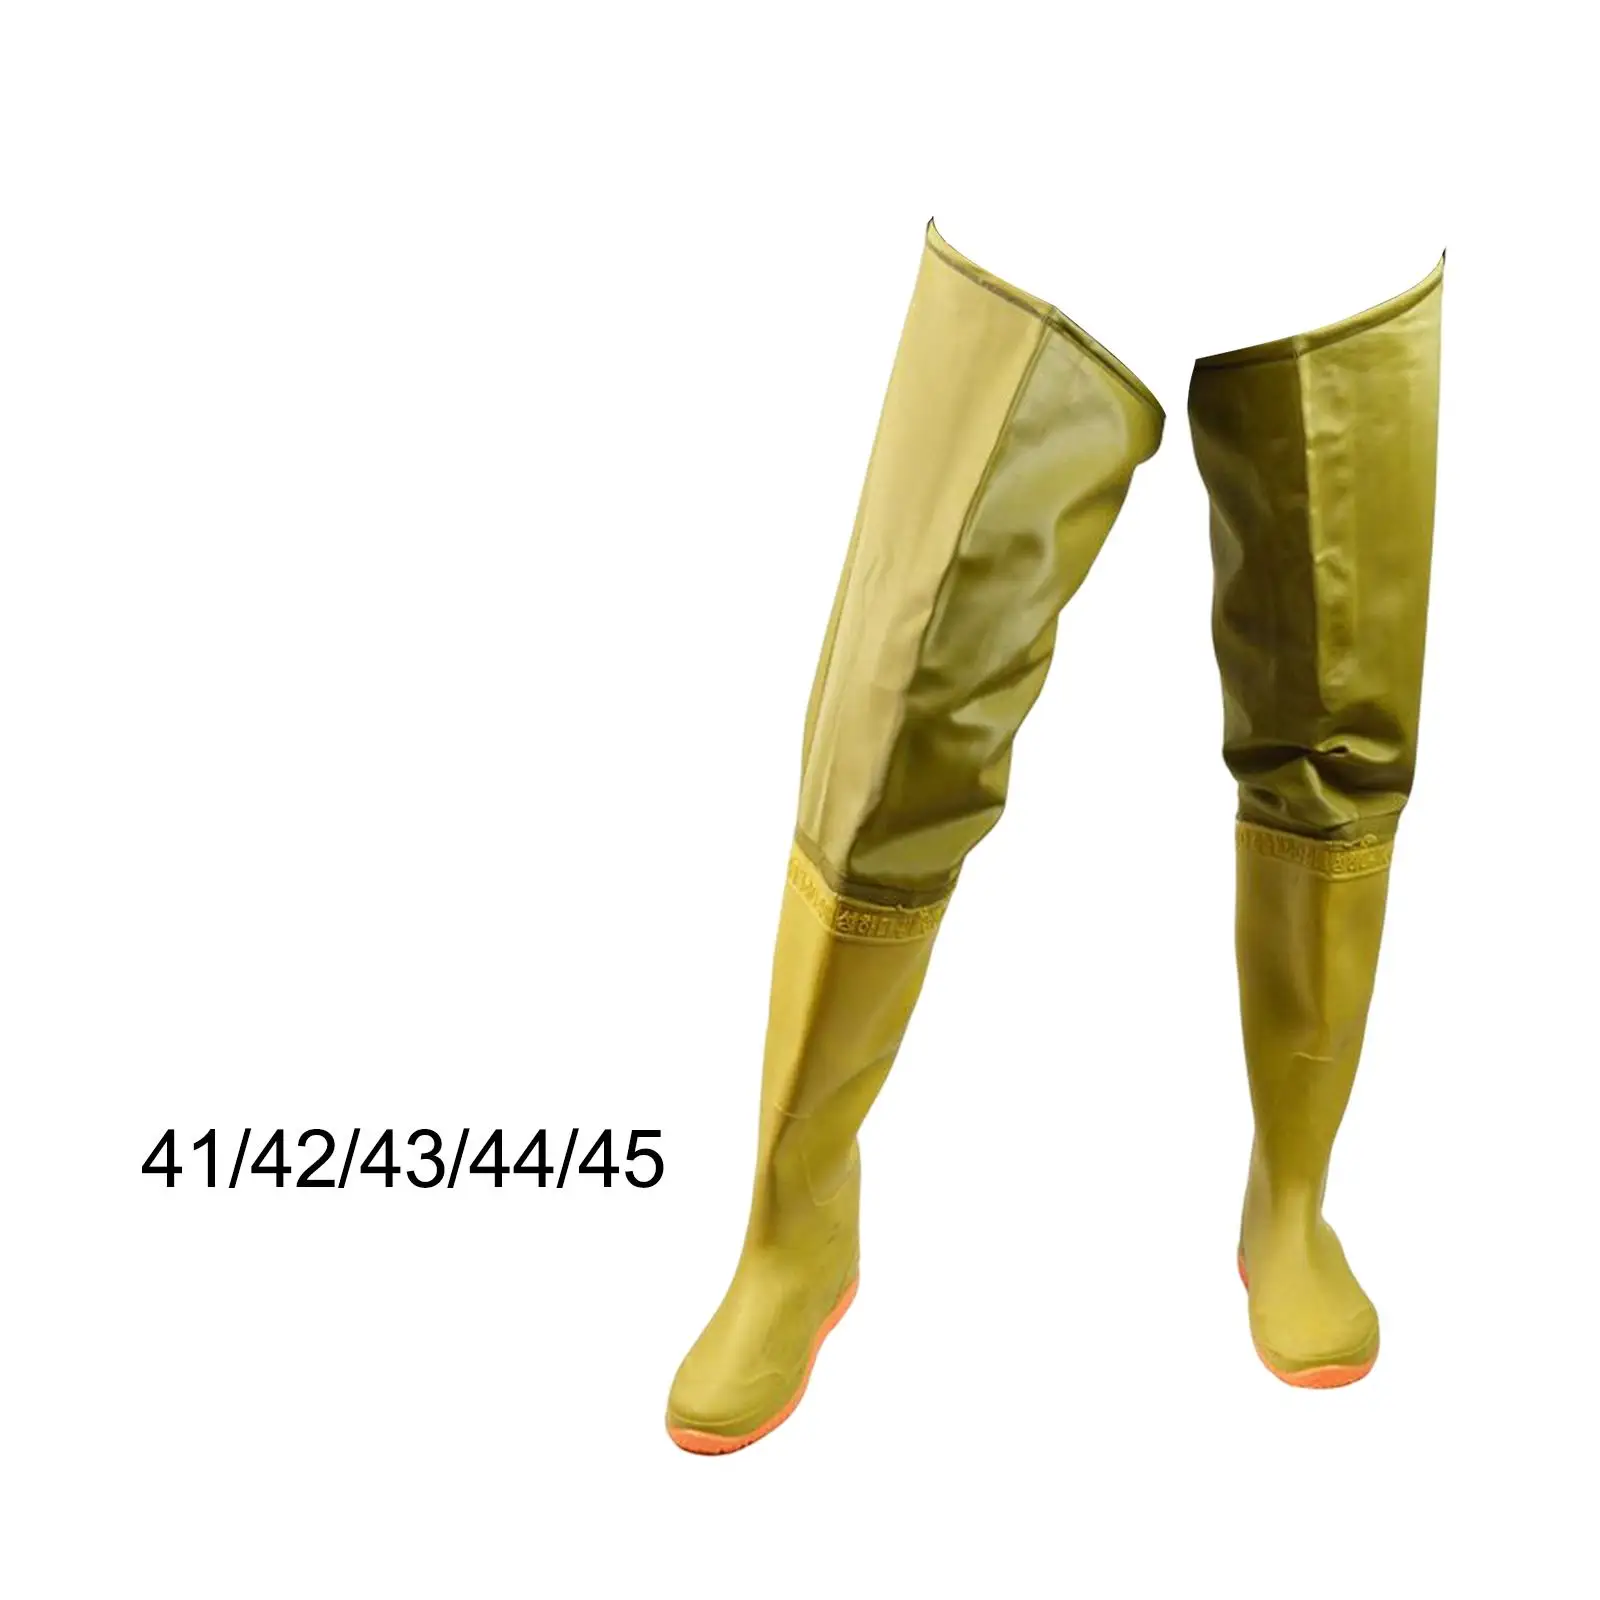 Fishing Hip Waders Waterproof Wading Hip Boots Water Pants with Buckle Boots Wellies Nylon Fishing Waders for Fishing Muck Work